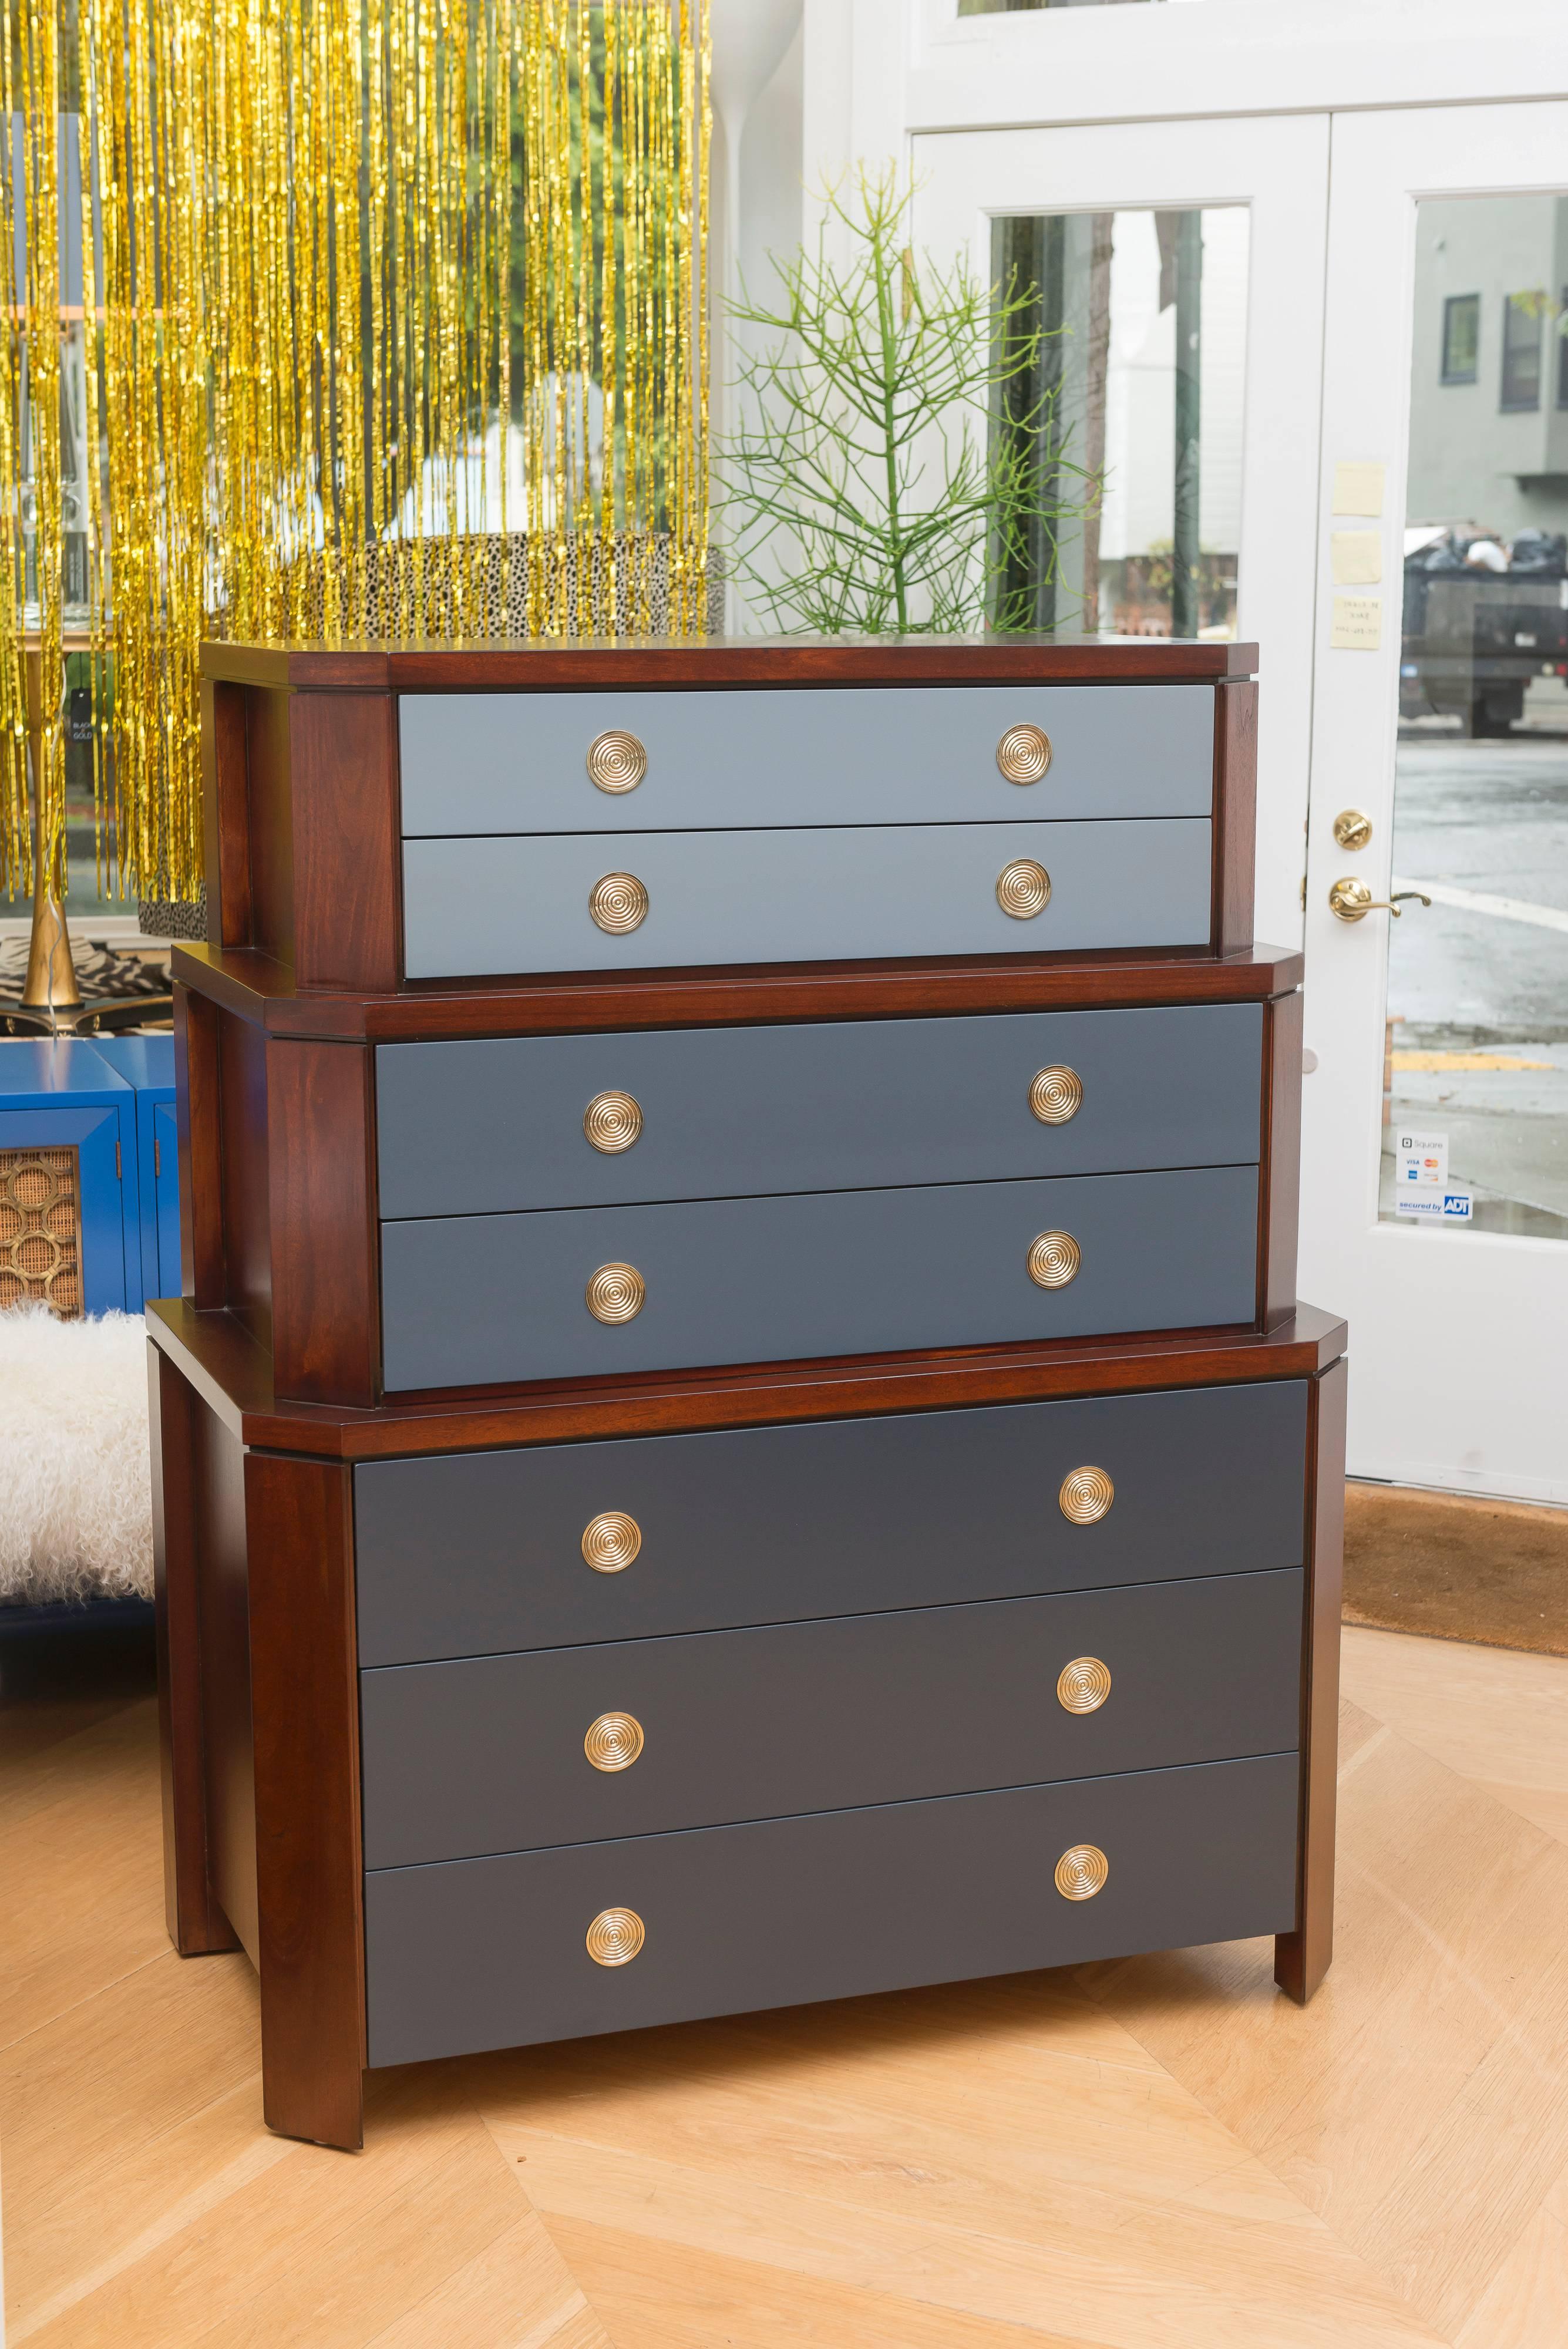 Beautifully restored chest designed by Charles Pfister, with new brass-plated hardware.